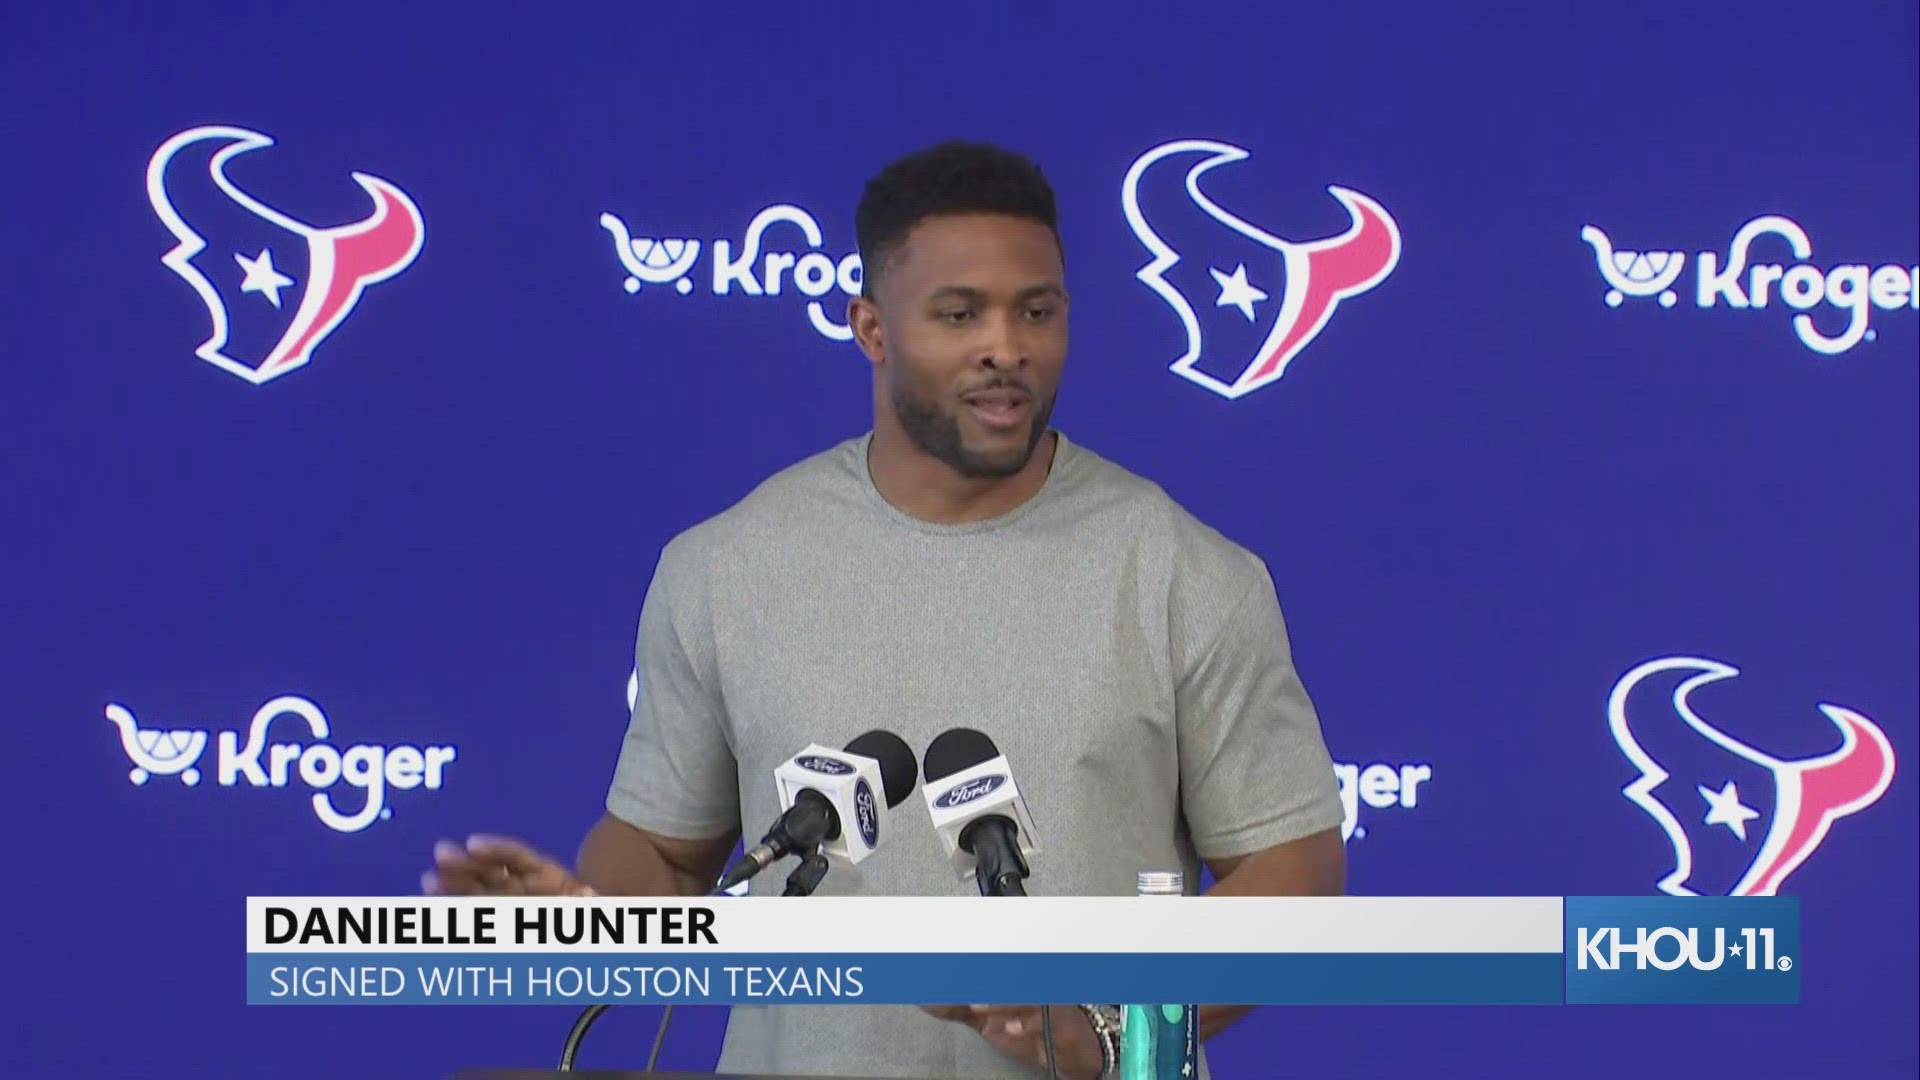 Danielle Hunter joined Houston in free agency and spoke to the media on Thursday. He was asked about his number 99 and responded that he's changing it.